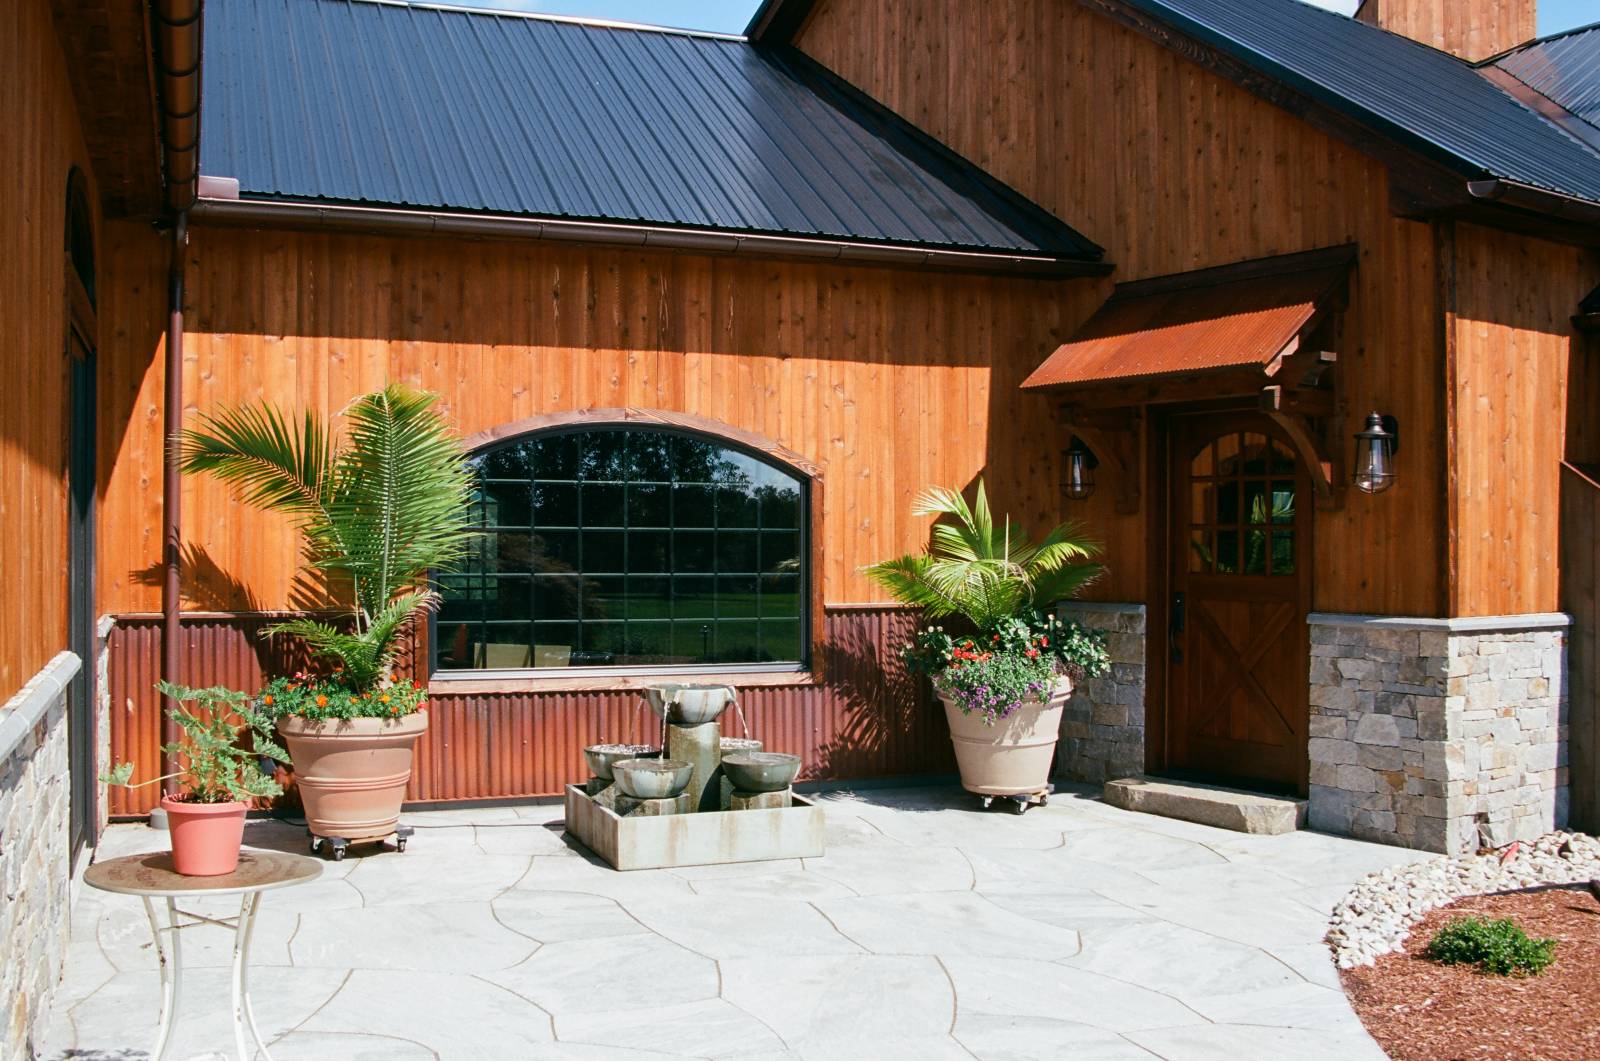 Timber Frame Eyebrow Roof over Entry Door • Arched Bow Top Window • Rustic Siding • Rusty Metal Wainscot • Cultured Stone